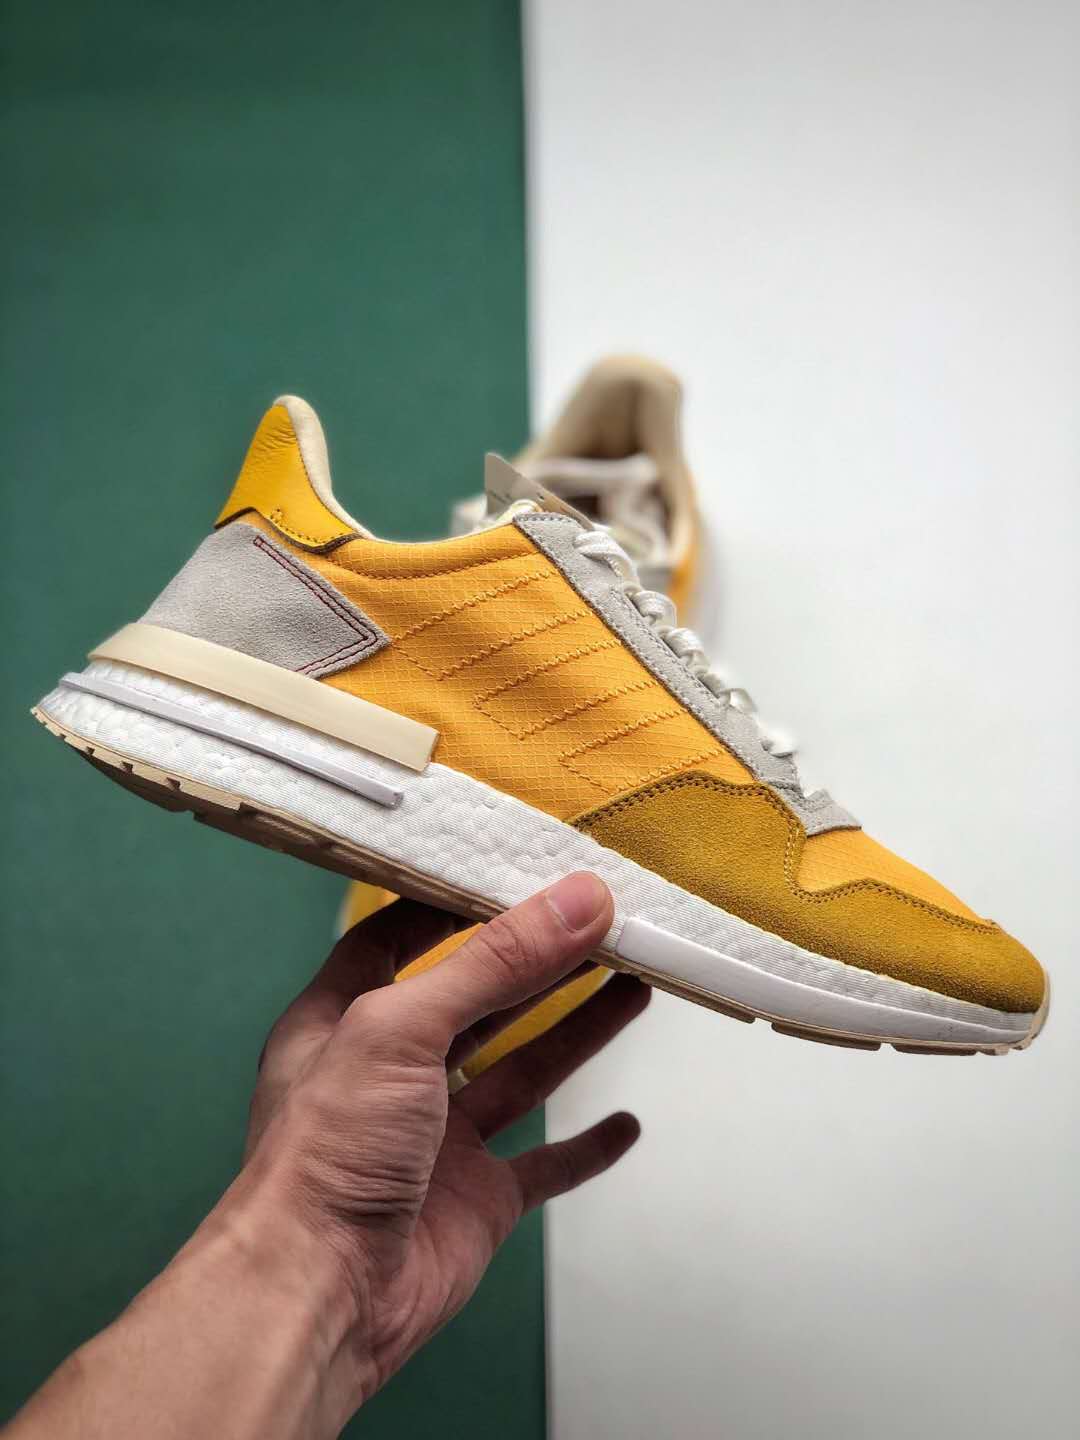 Adidas originals ZX 500 RM 'Bold Gold' CG6860 - Stand out with style!